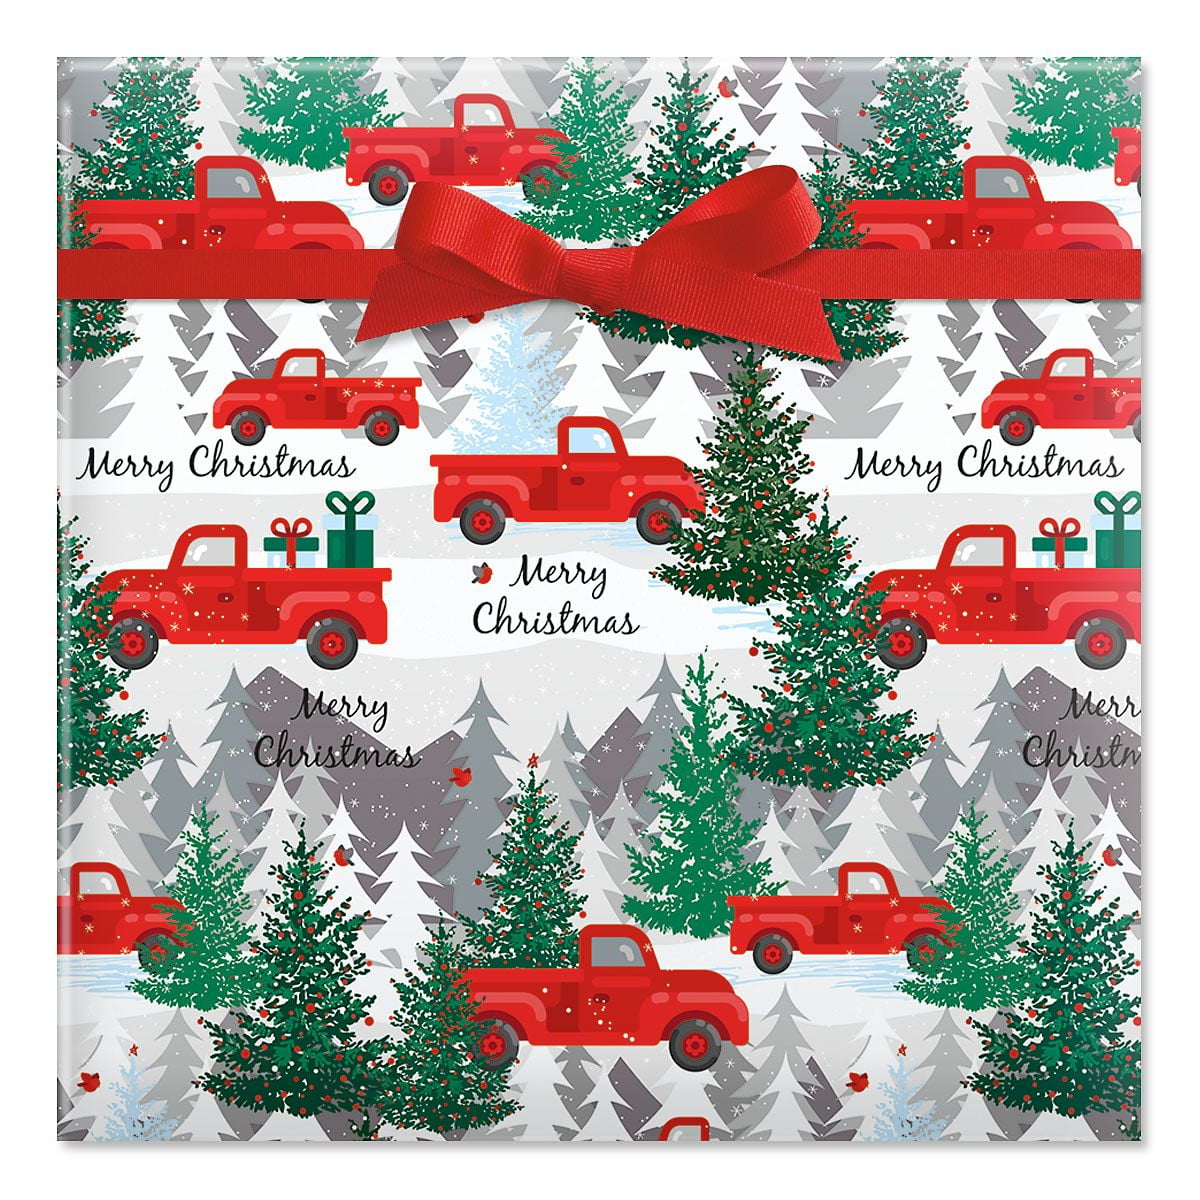 Jumbo Red And White Tree Holiday Wrapping Paper Roll - World Market